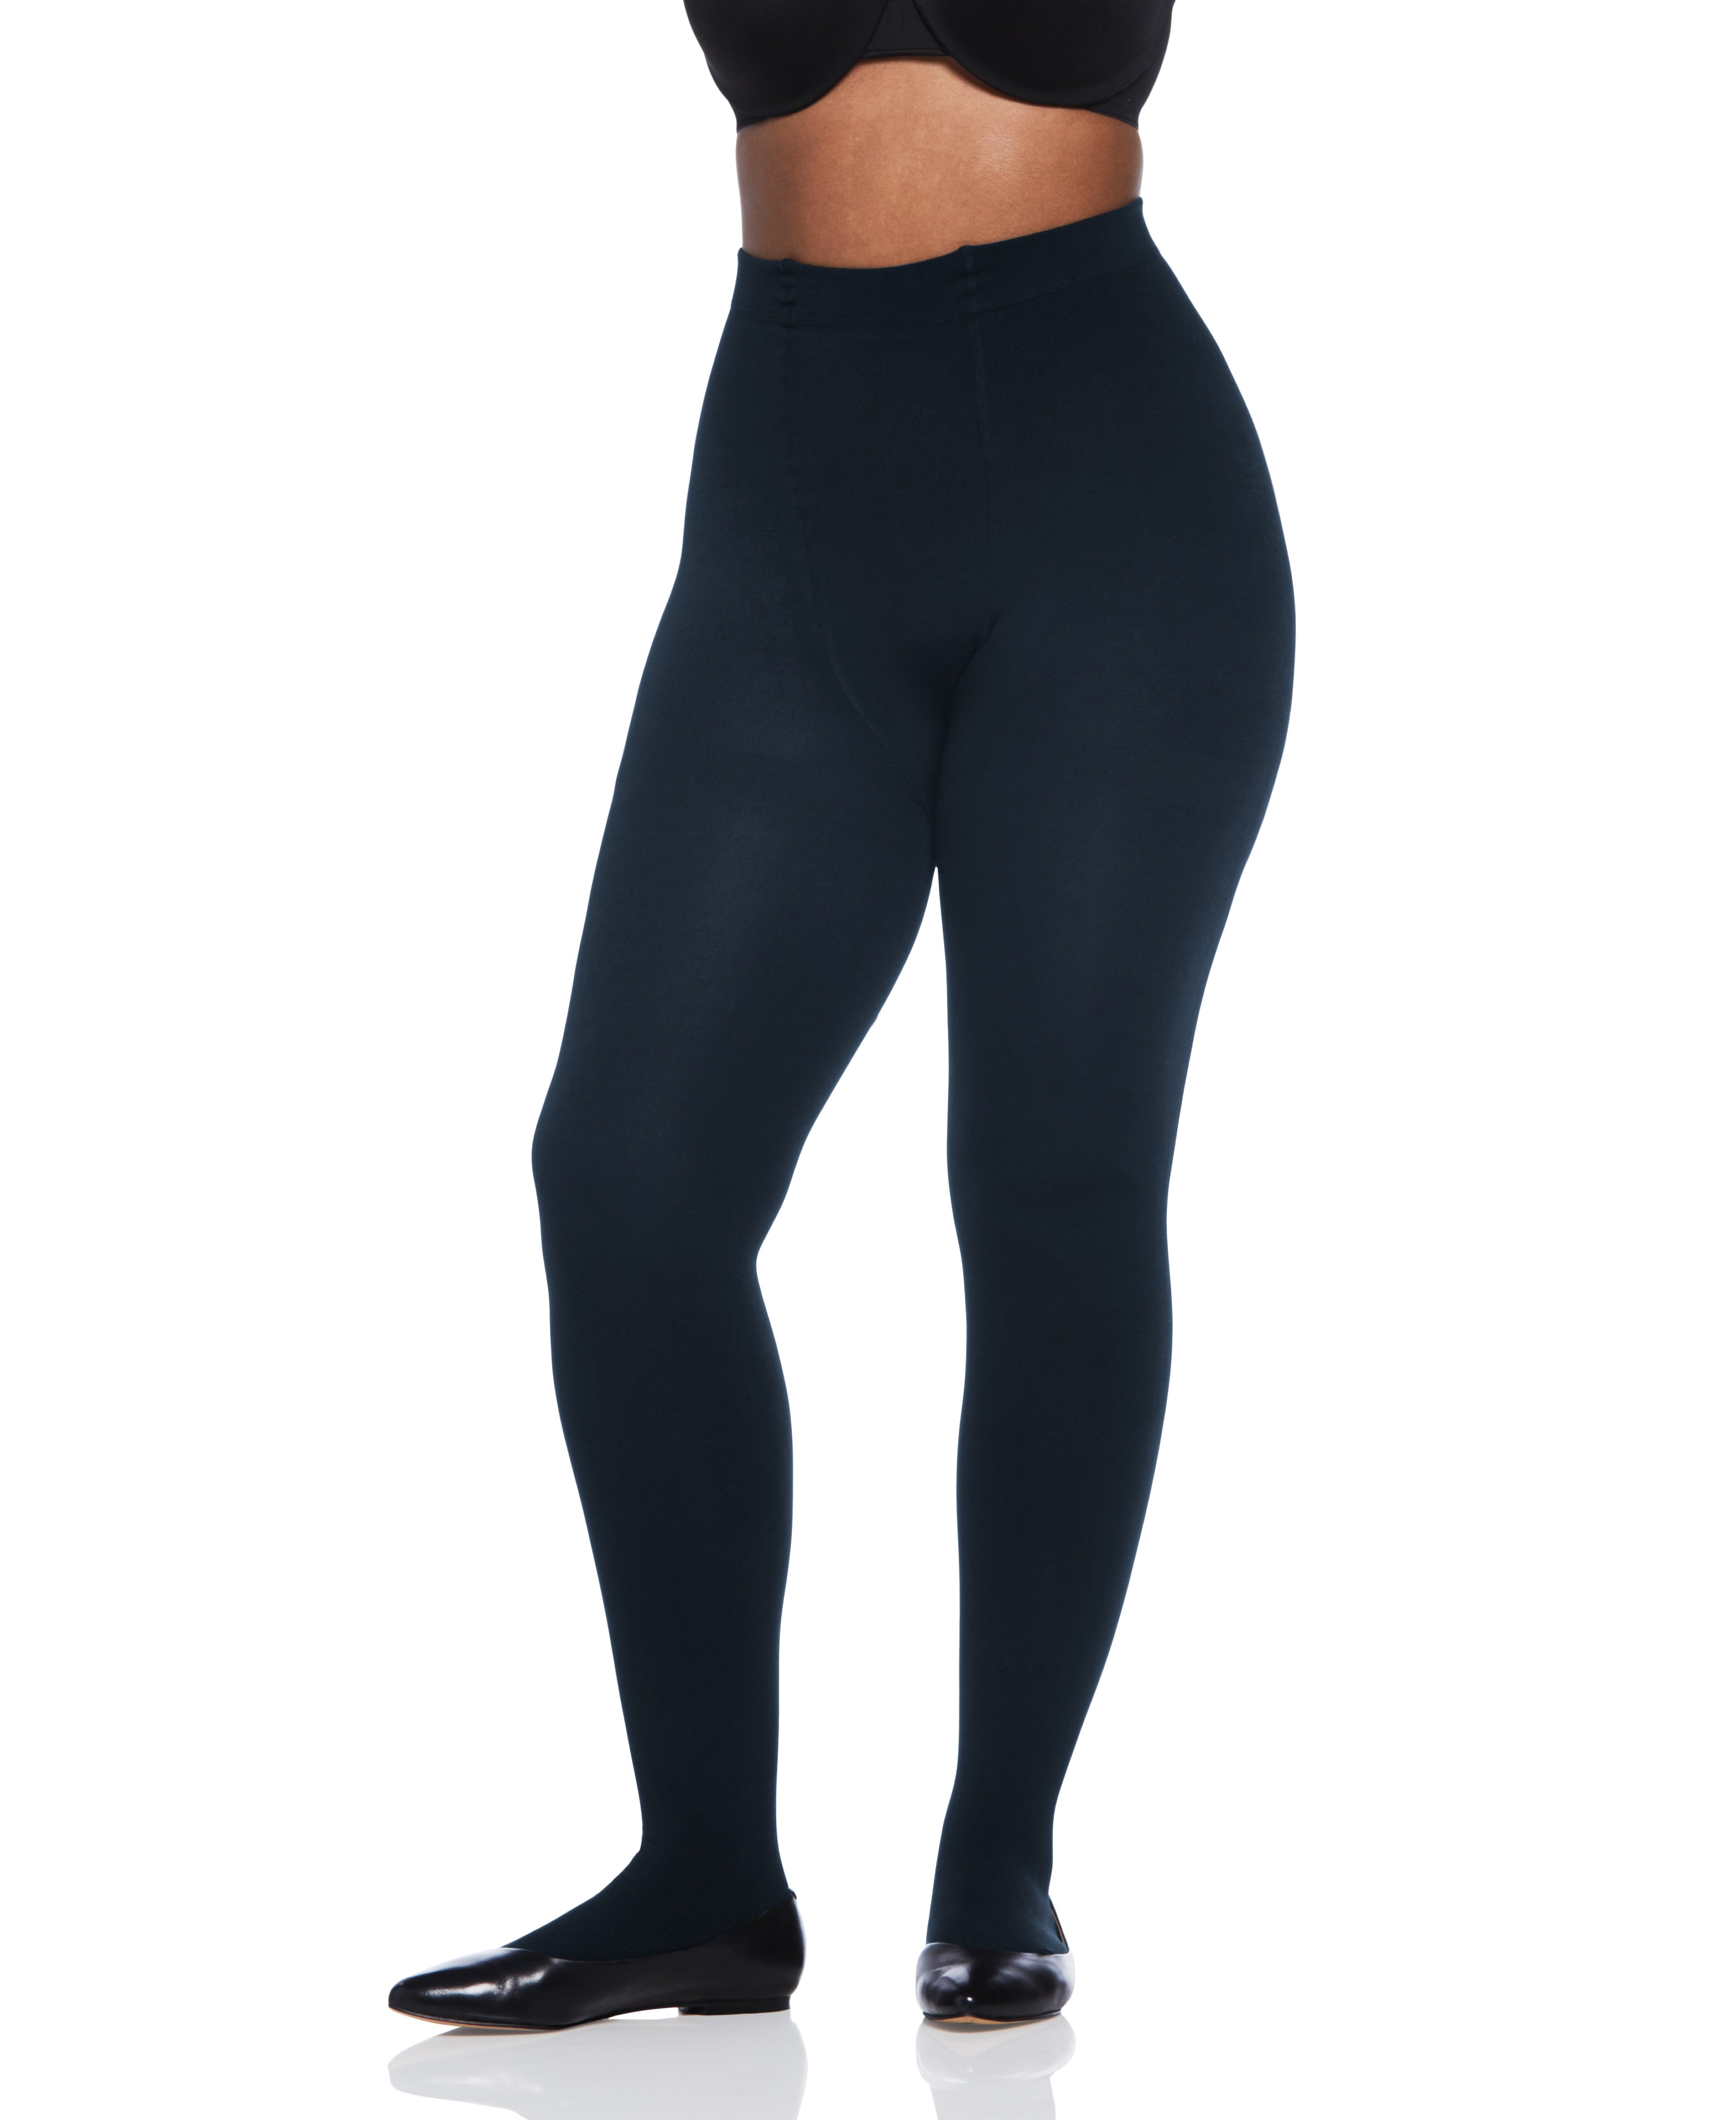 The Easy On! Plus Thermal Plush Lined Tight - 5046